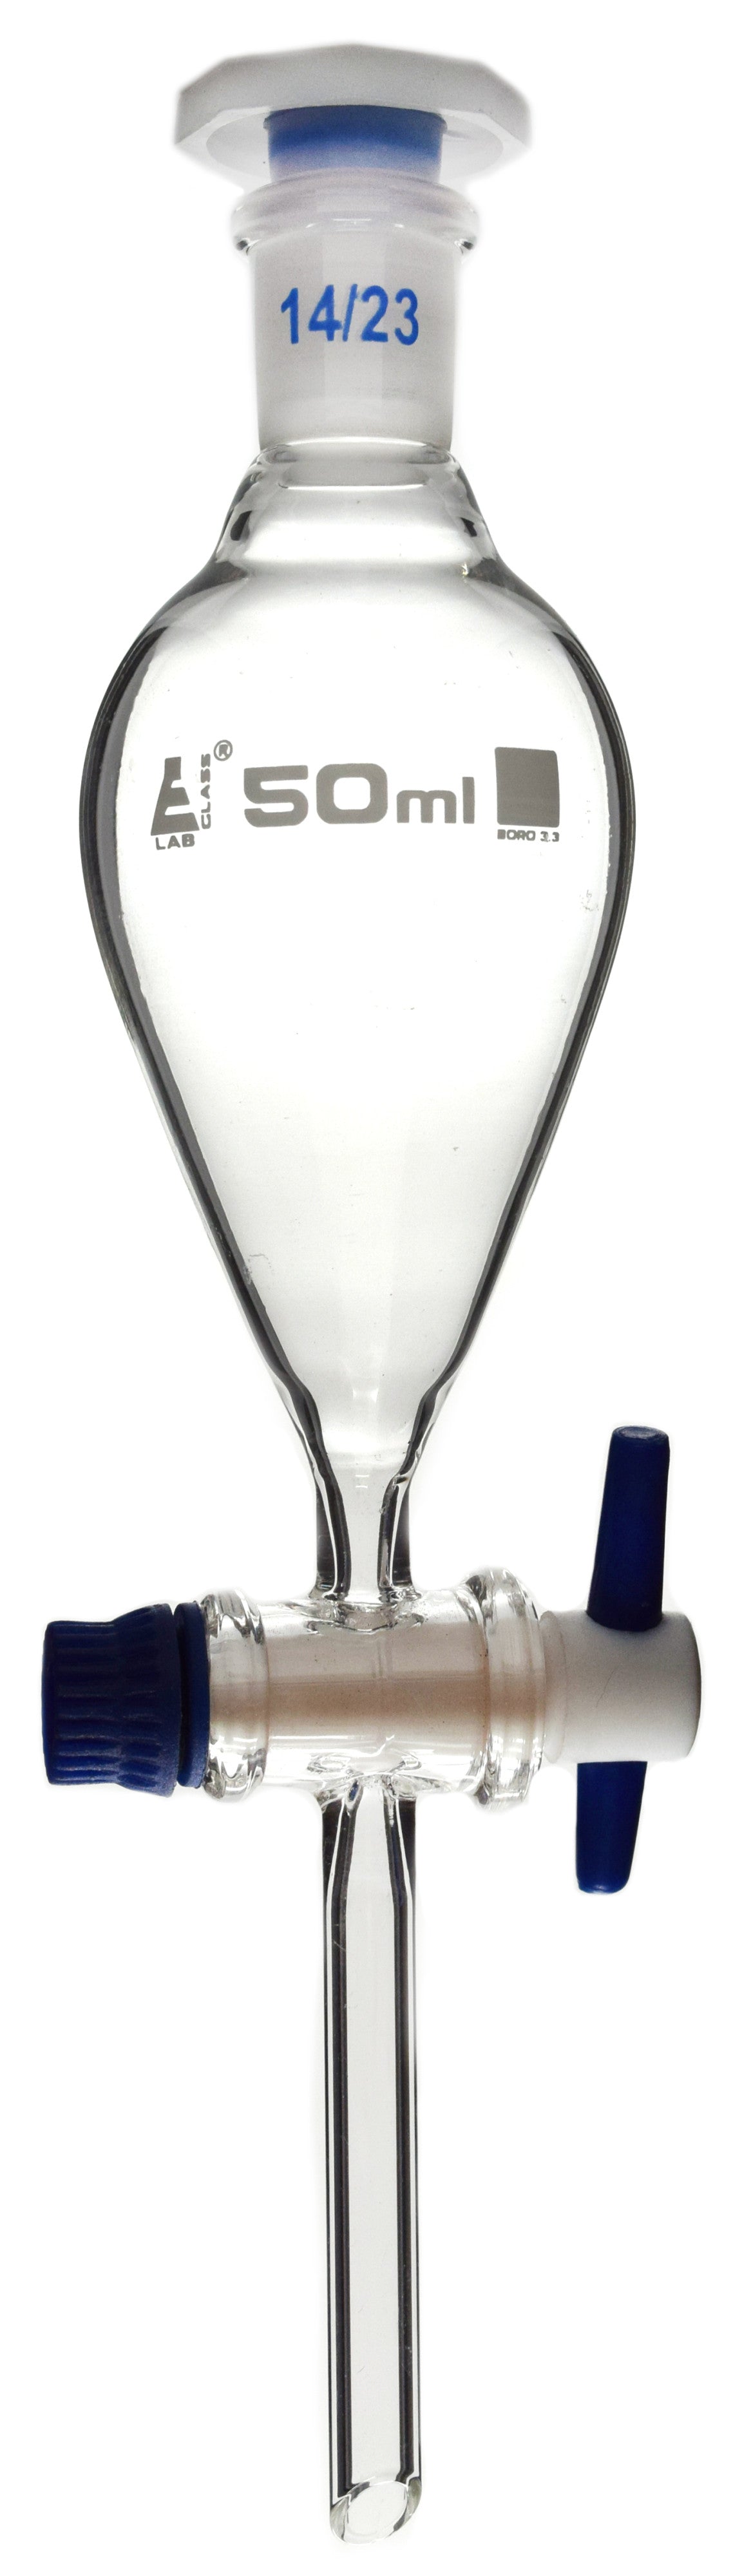 Glass Squibb Separatory Funnel with PTFE Key Stopcock and Interchangeable Polypropylene Stopper, 50 ml, Autoclavable